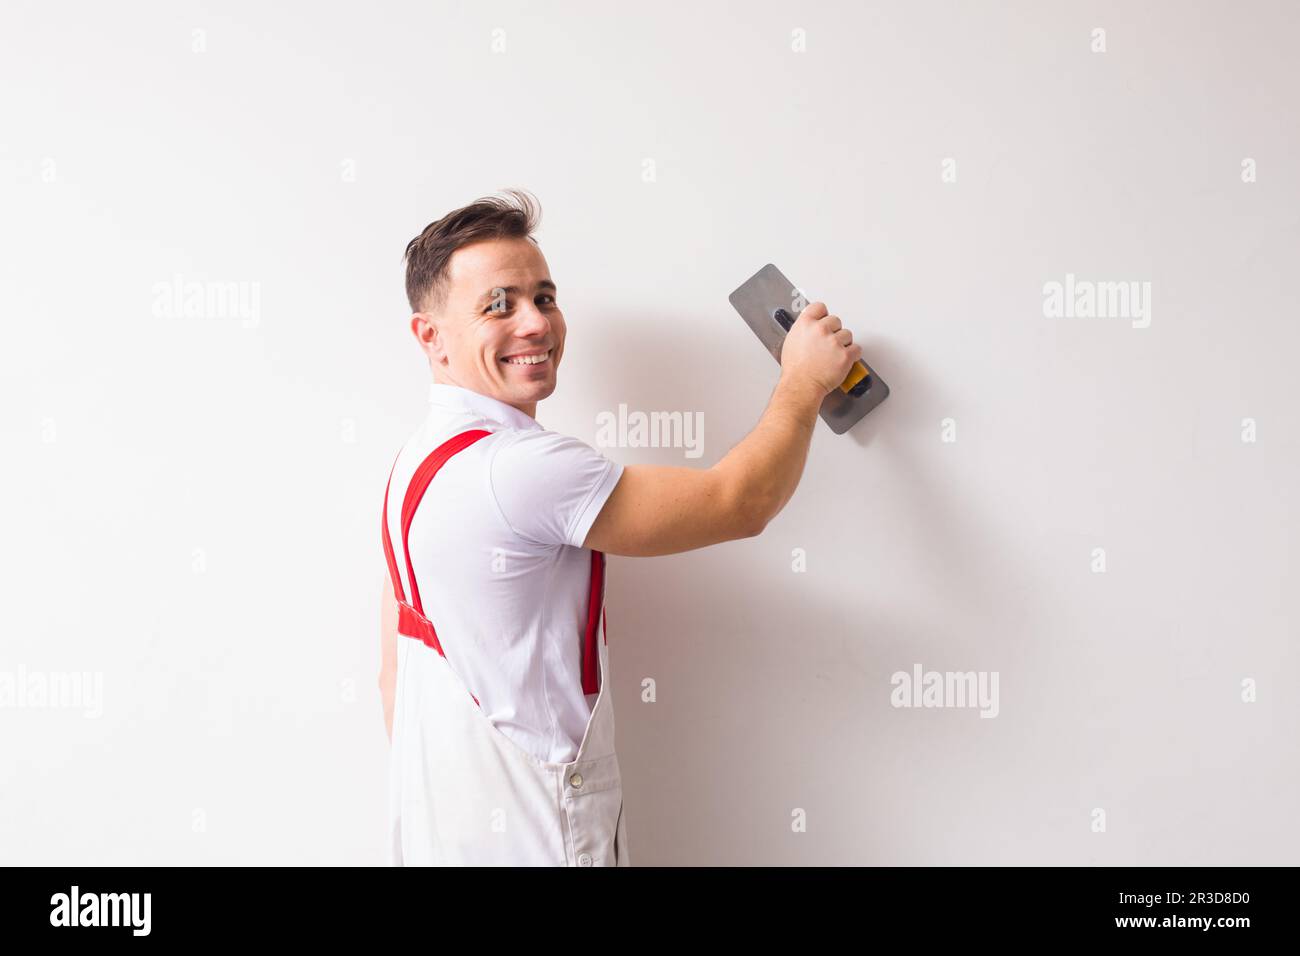 The plasterer is aligning wall using a special tool Stock Photo